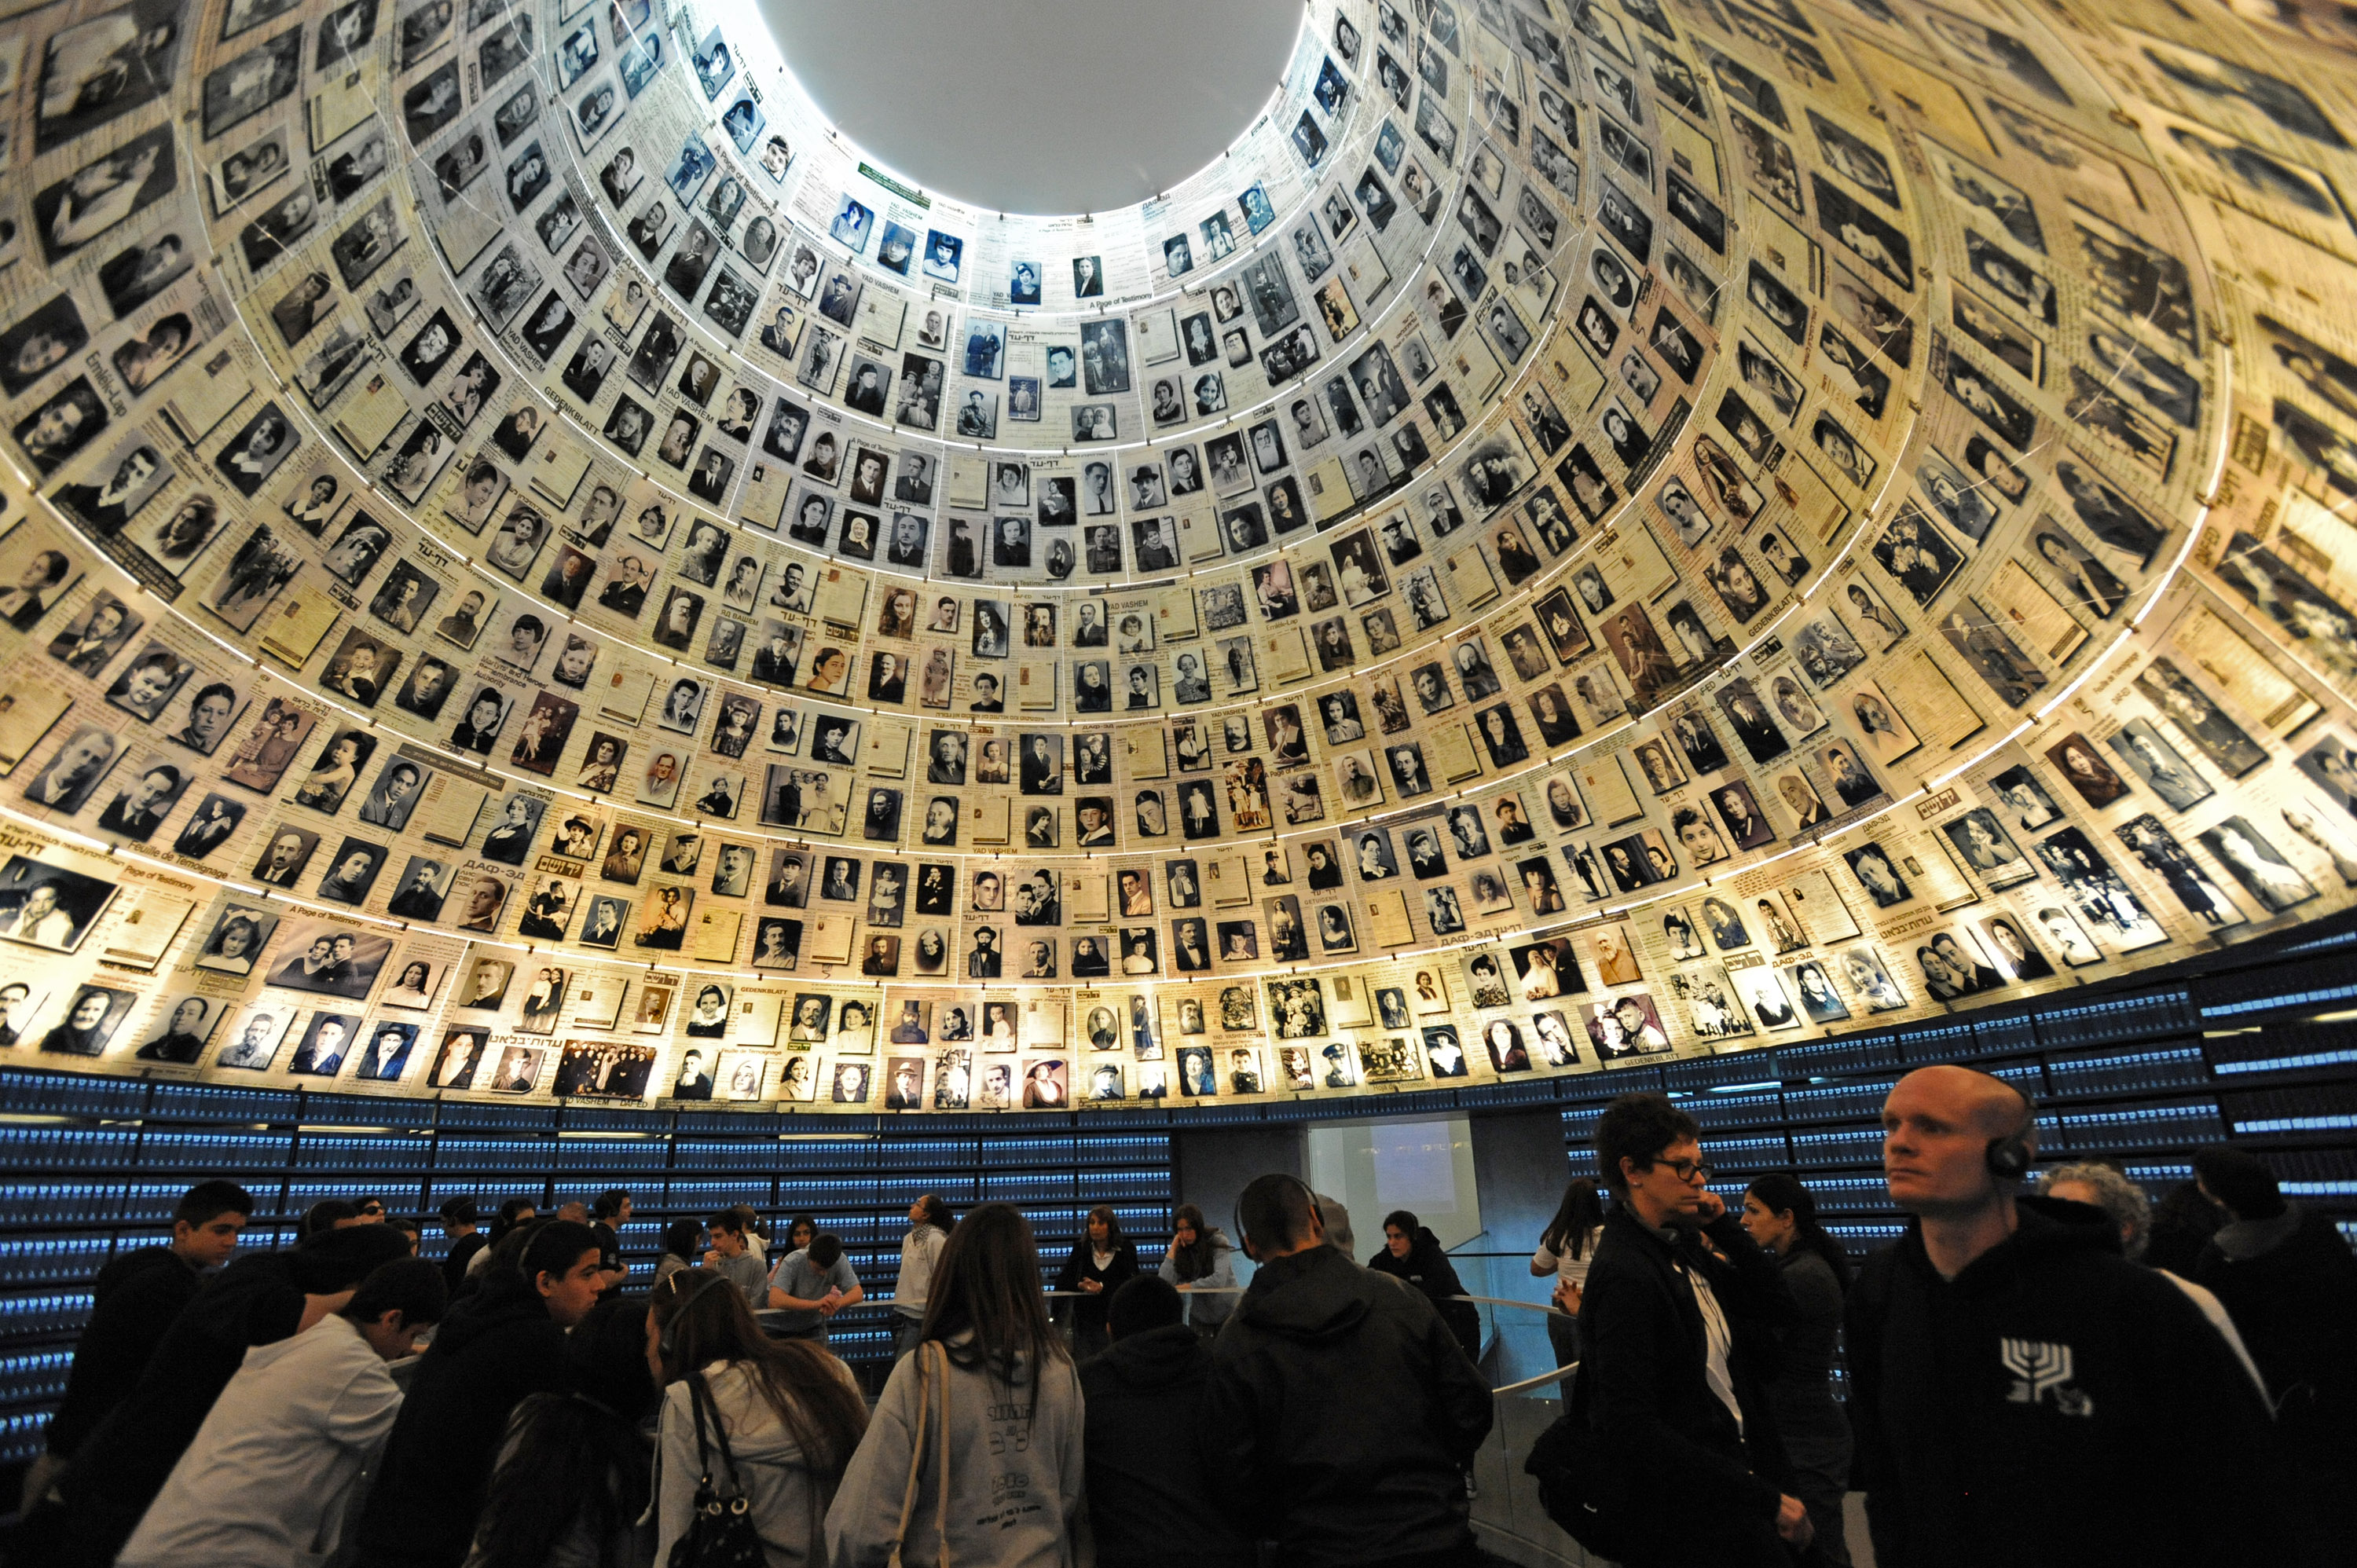 Tourists visit the Hall of Names in the Yad Vashem Holocaust Museum in